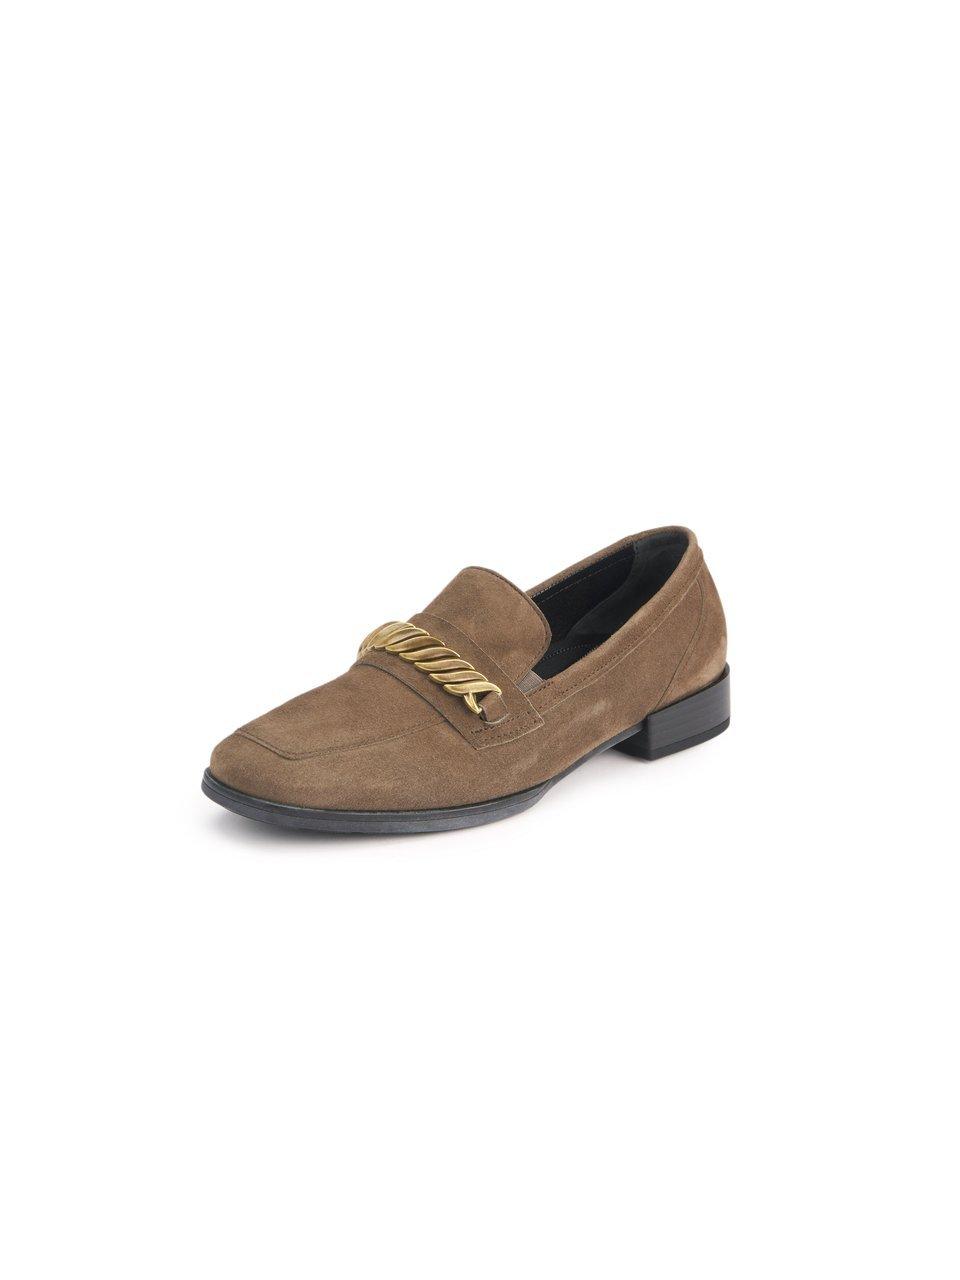 Gabor dames loafer - Taupe - Maat 39